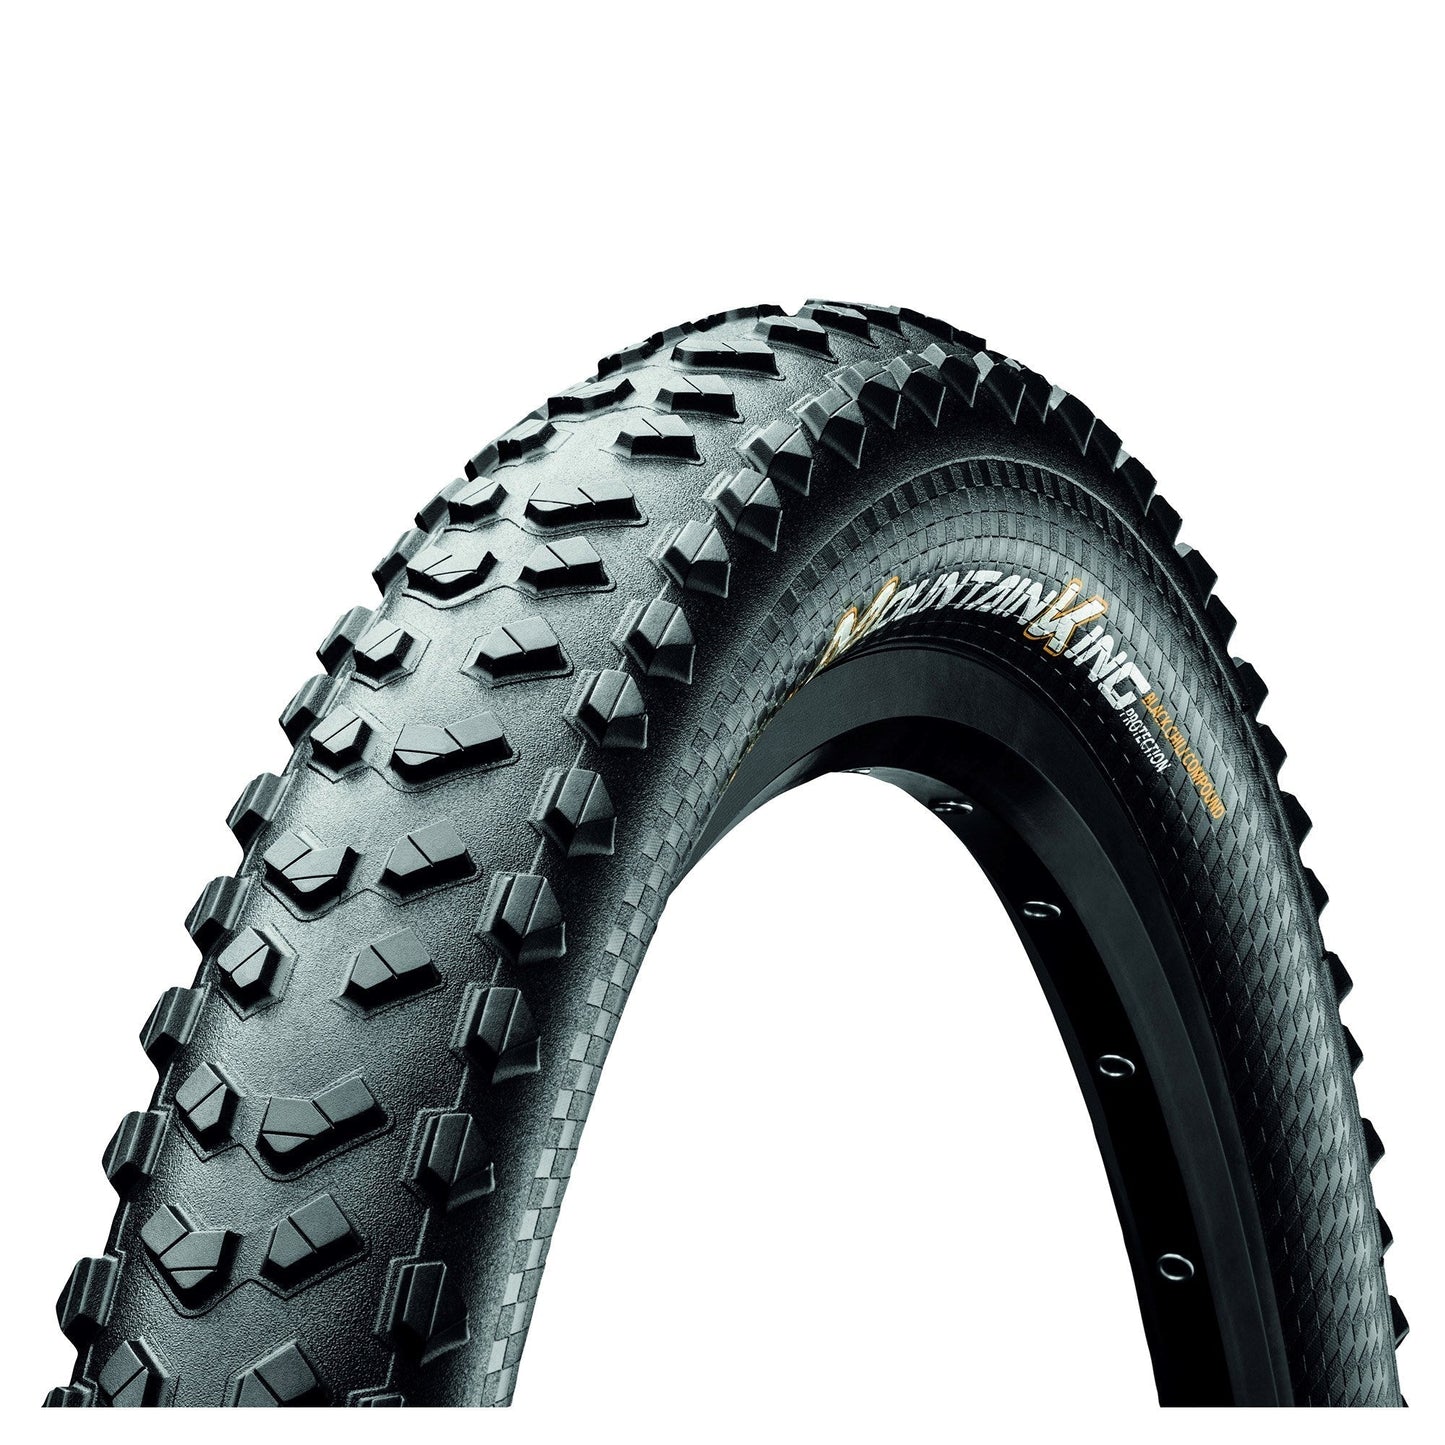 CONTINENTAL MOUNTAIN KING 2.3 PROTECTION 29.30" FOLDING TYRE